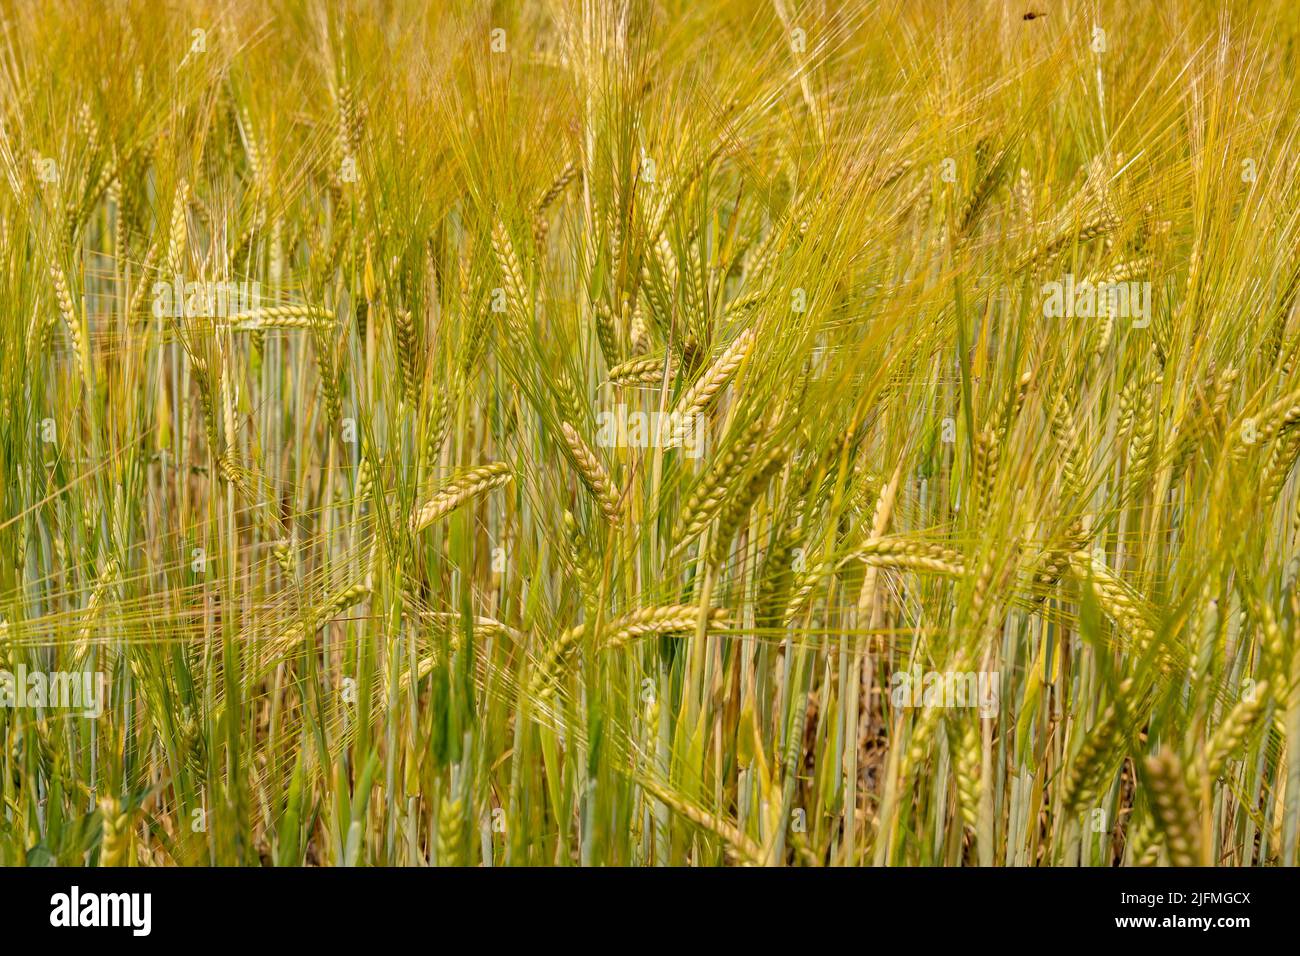 Close up of golden barley on farmland, a grain commonly used for brewing beer Stock Photo